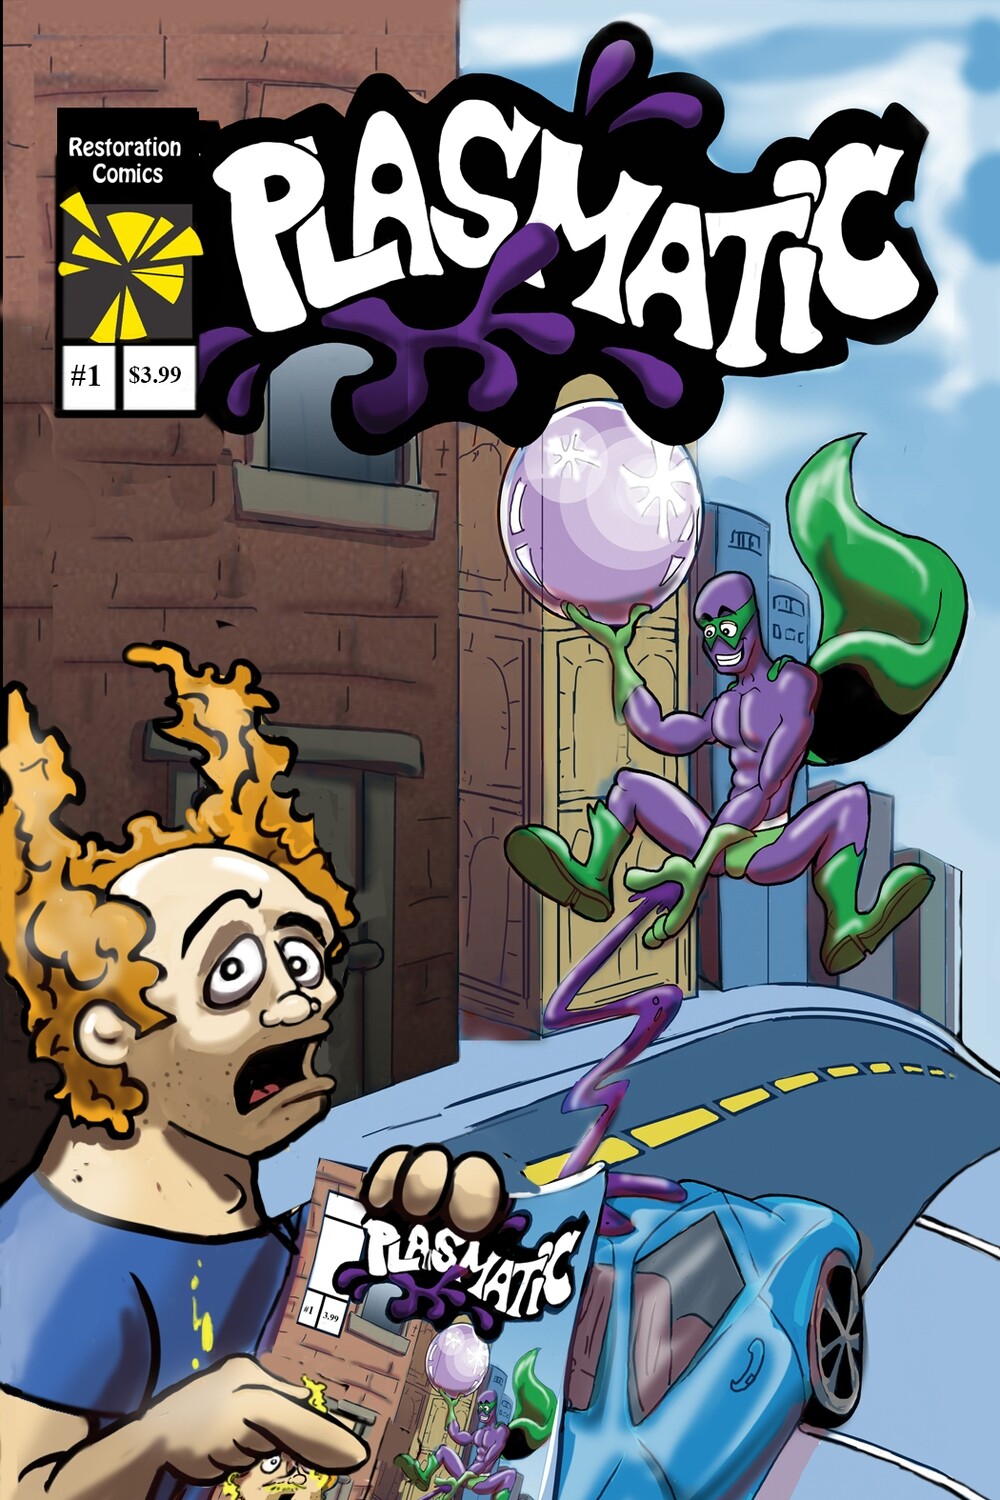 Plasmatic issue # 1 (Print/ physical comic book)